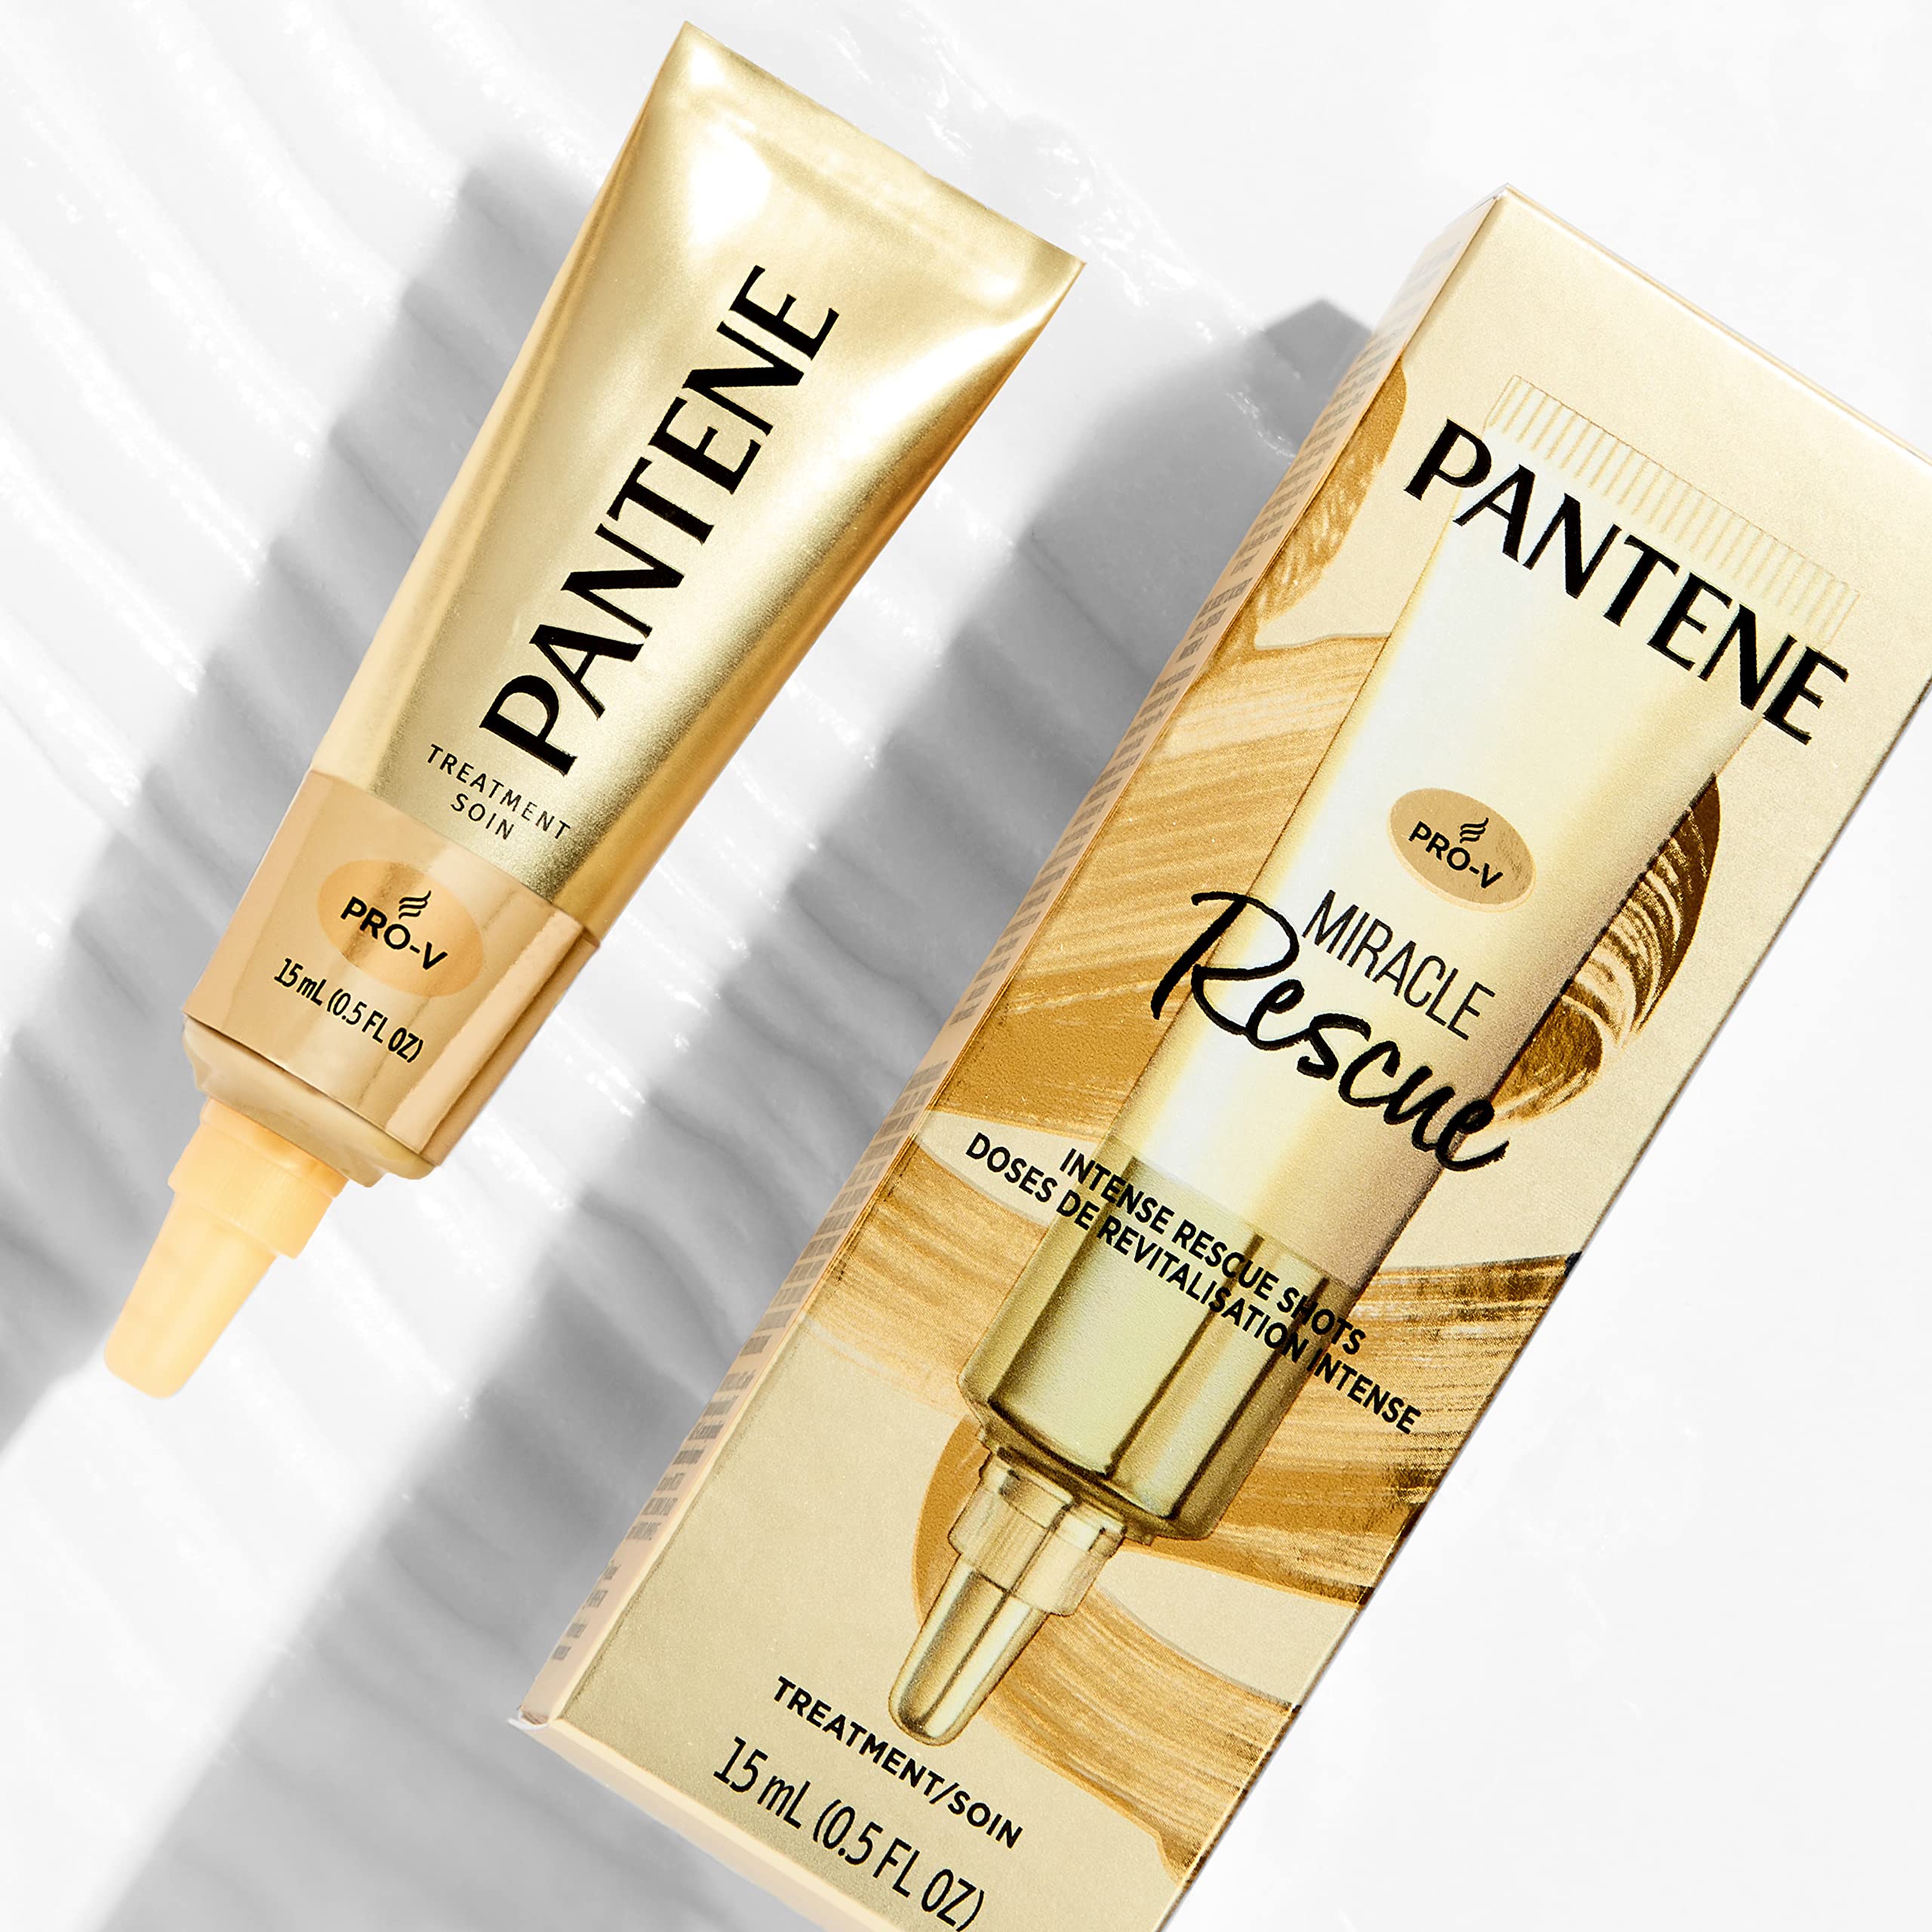 Pantene Shampoo Twin Pack with Hair Treatment, Volume & Body for Fine Hair, Safe for Color-Treated Hair